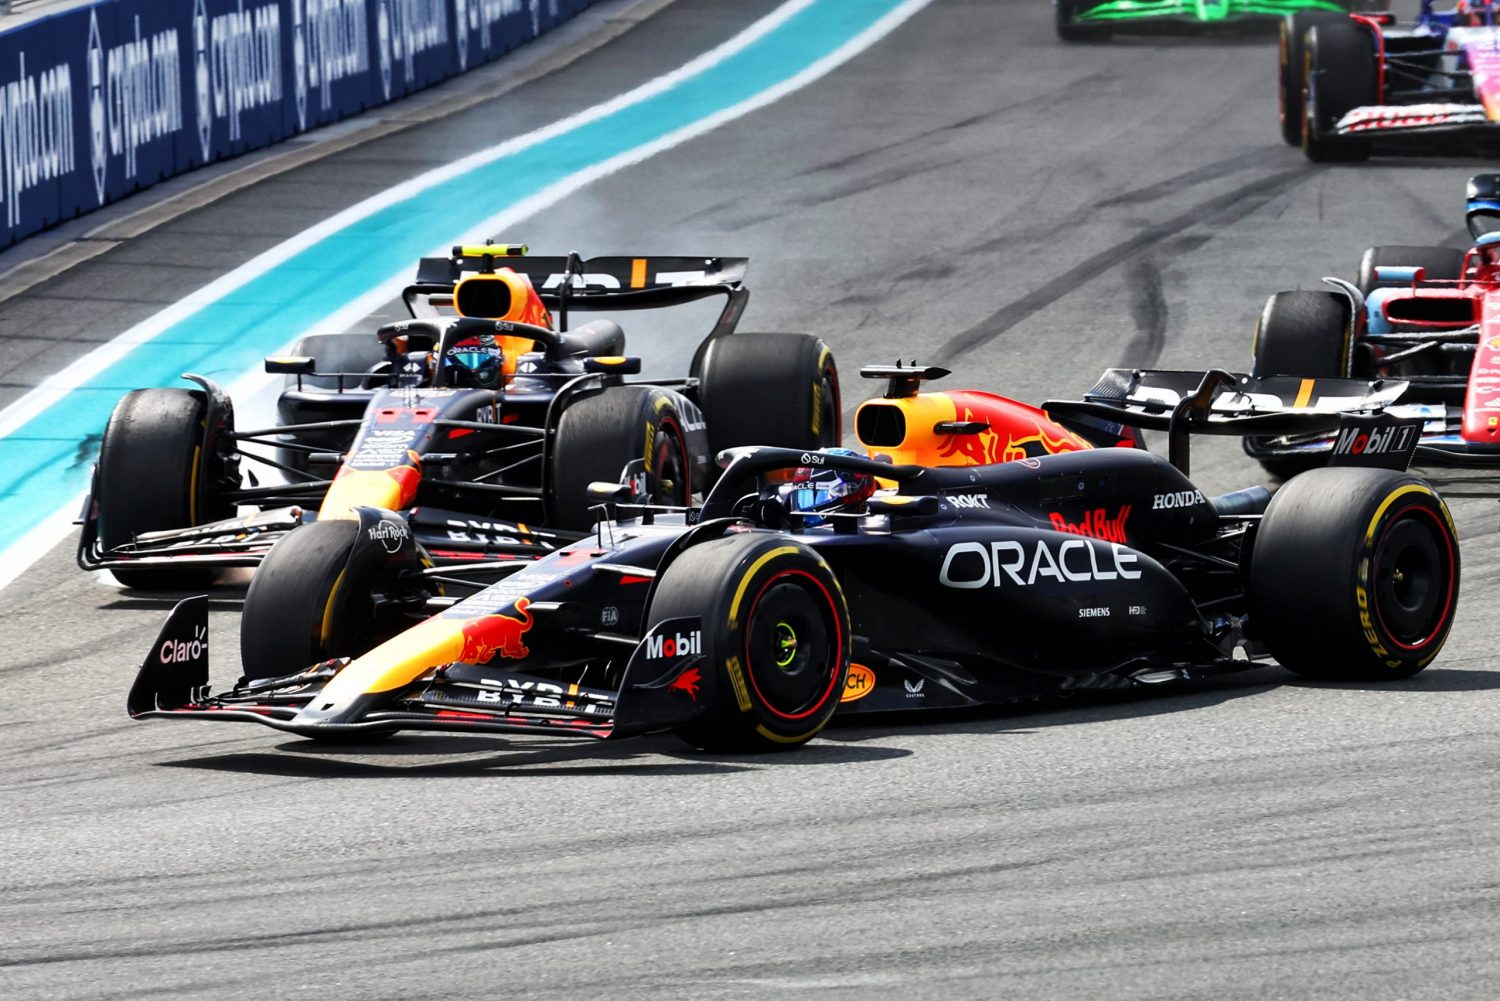 Verstappen: Perez first corner lock-up 'could have ended in disaster'